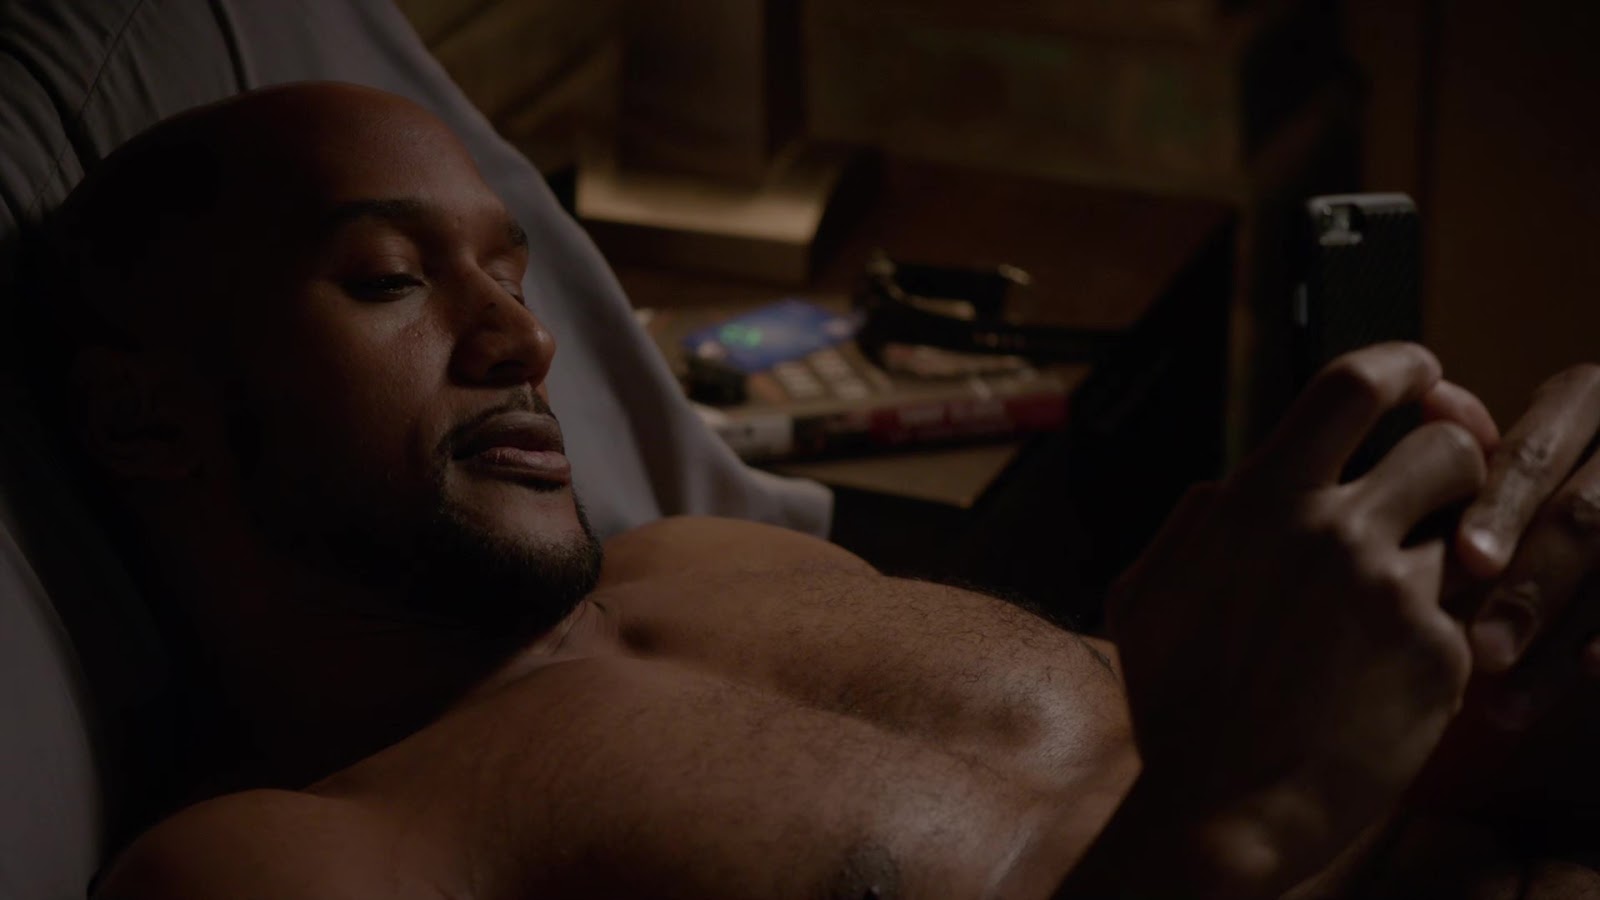 Henry Simmons shirtless in Agents Of S.H.I.E.L.D. 4-11 "Wake Up" ...